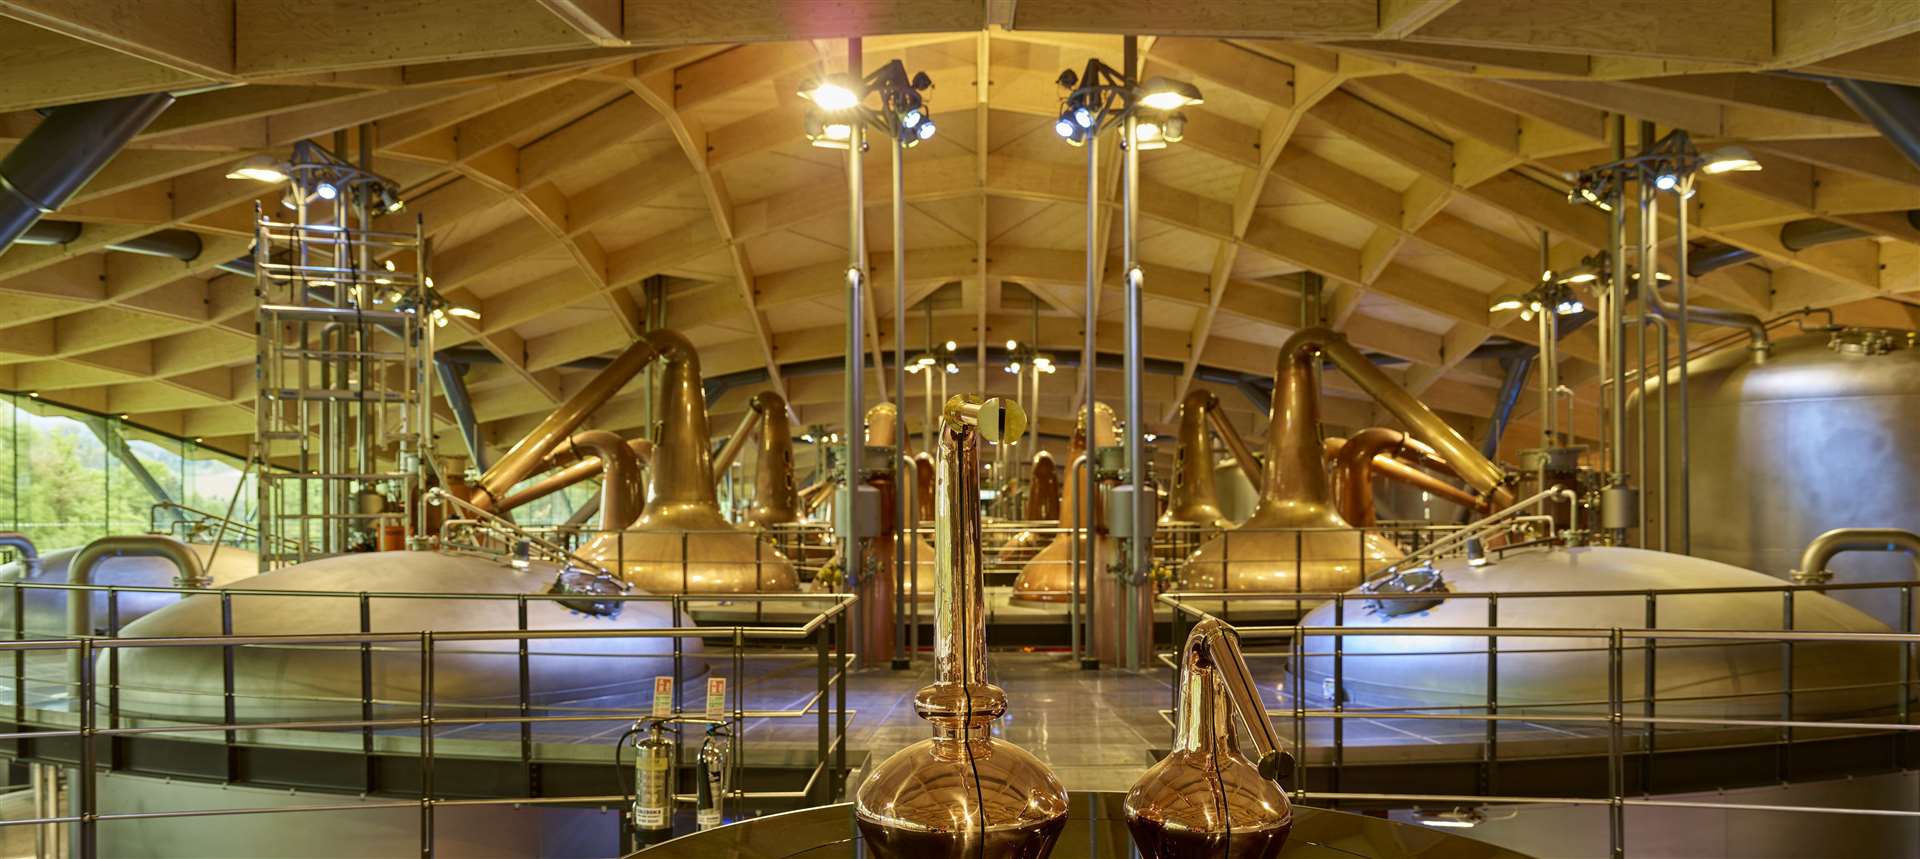 The new Macallan Distillery and Visitor Centre at Craigellachie.